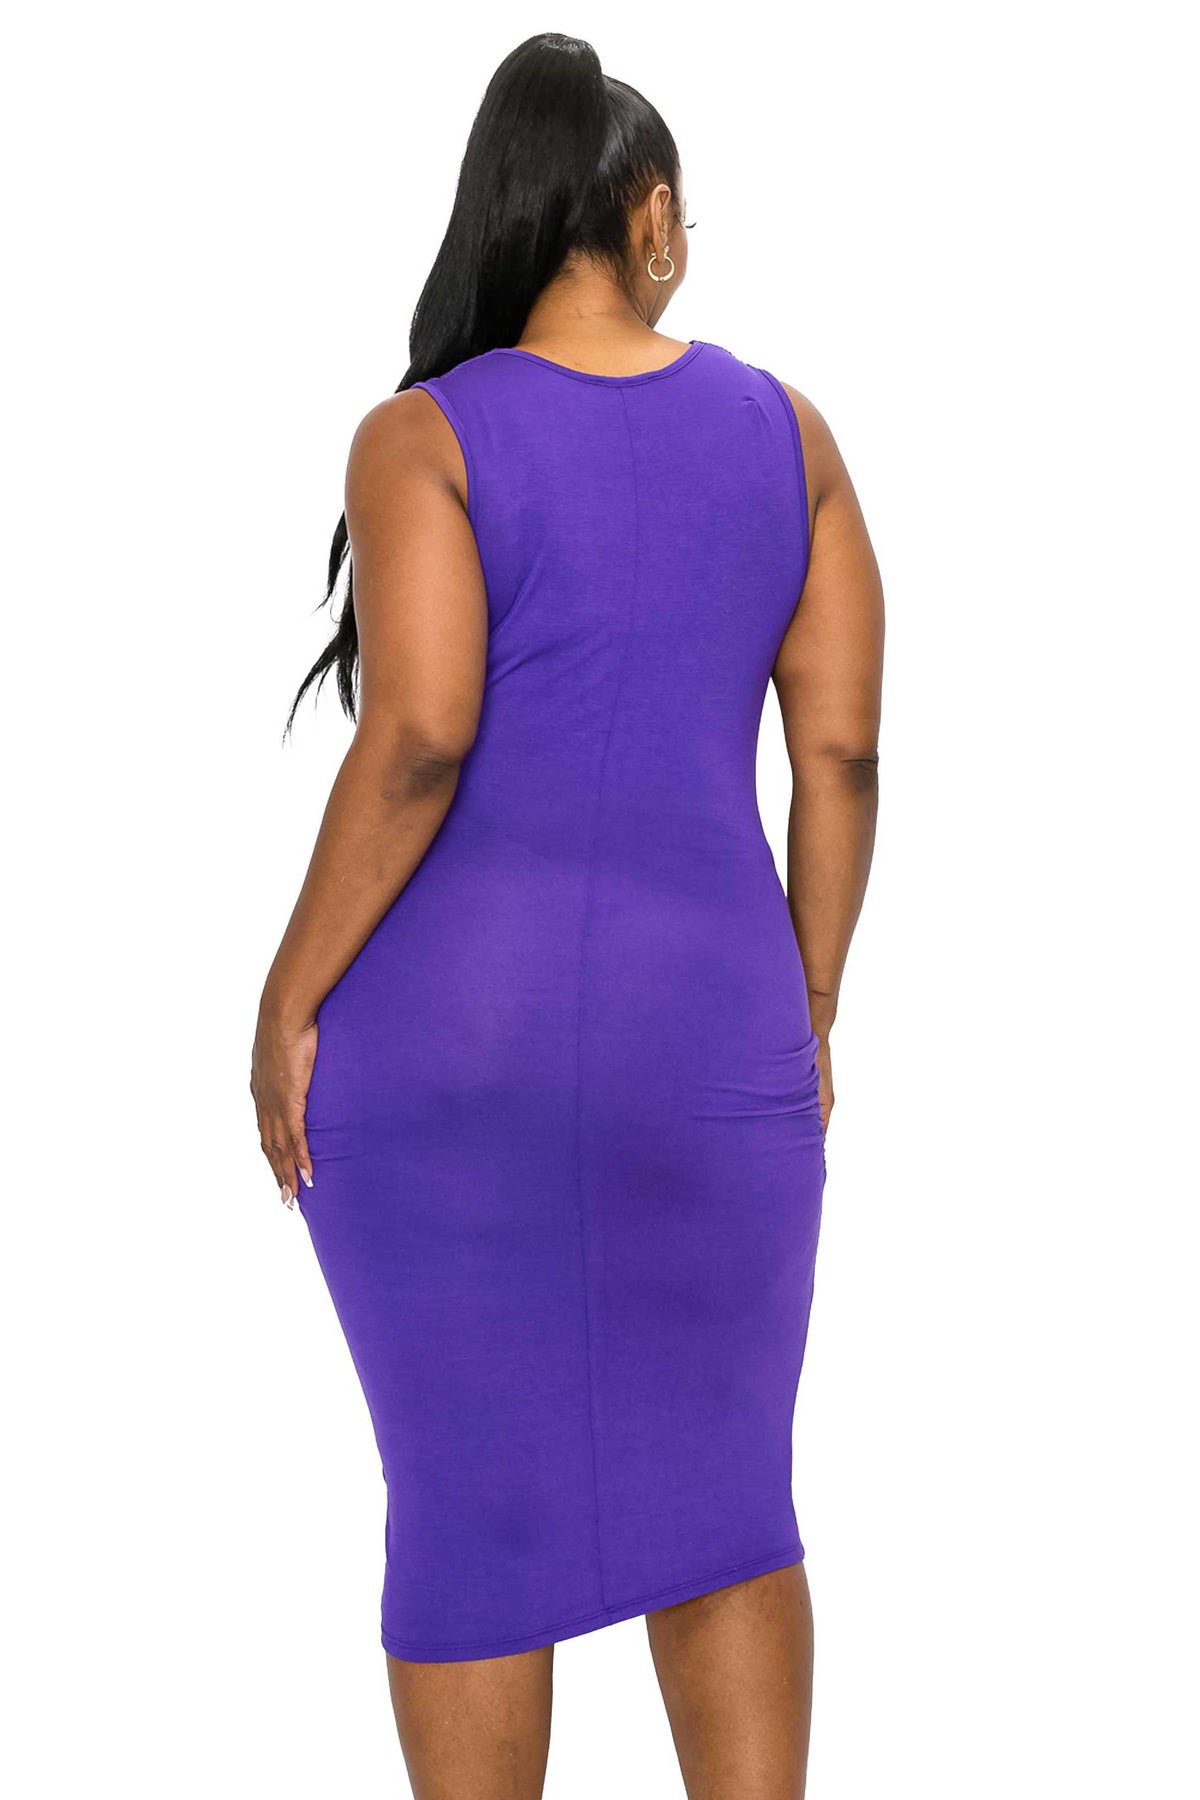 livd L I V D women's contemporary affordable trendy plus size clothing midi dress with neck cowl and hip ruching sleeveless in eggplant purple